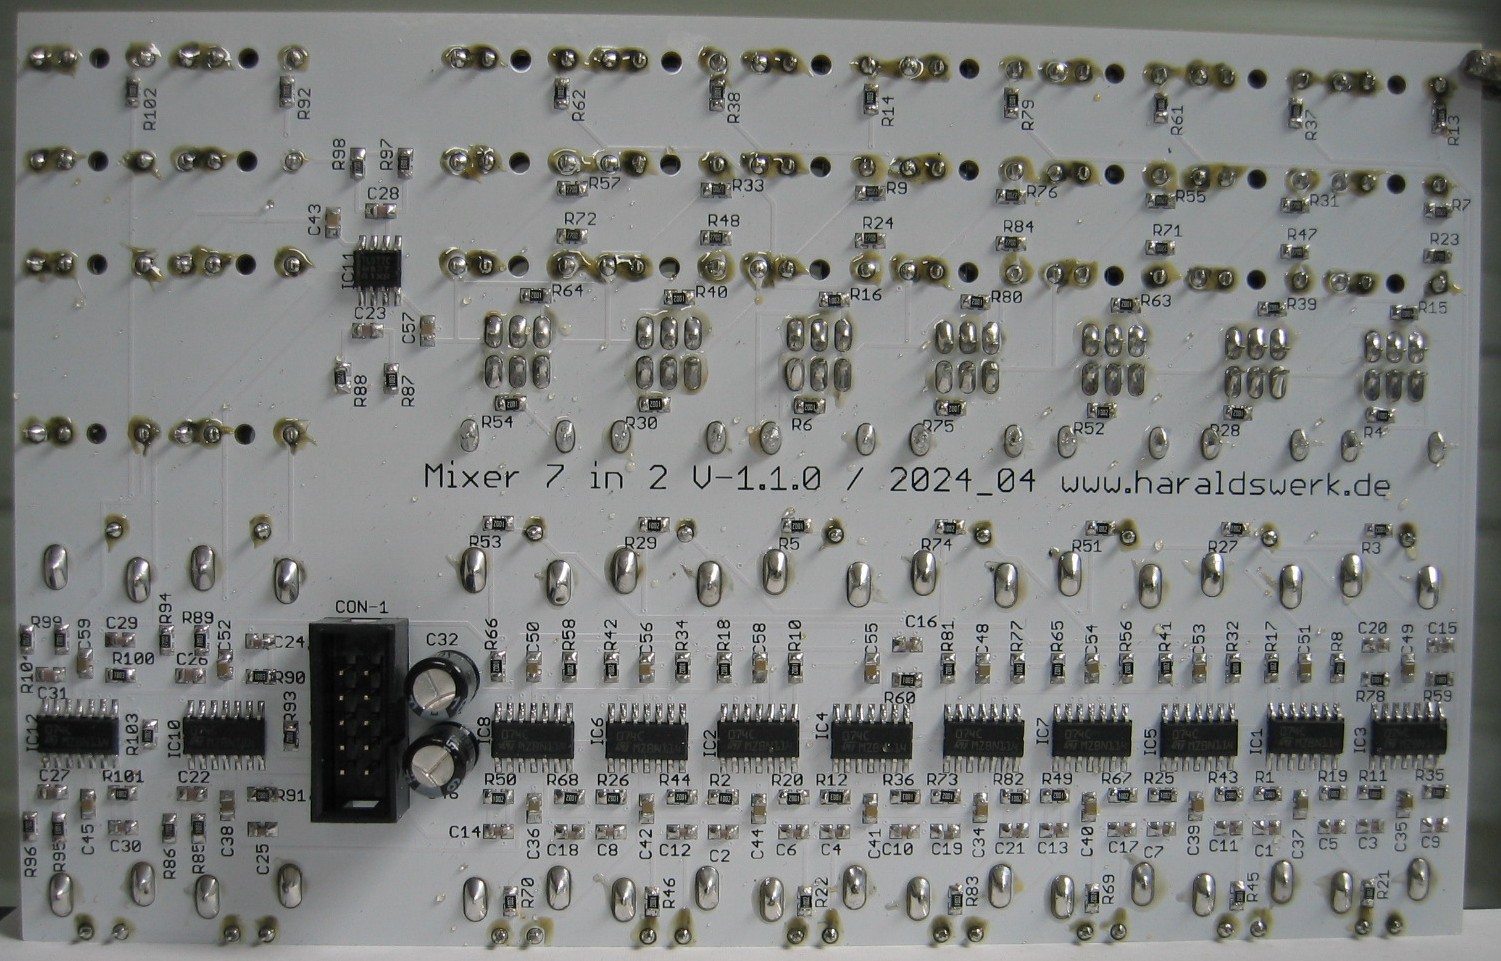 Mixer 7 in 2 populated control PCB back